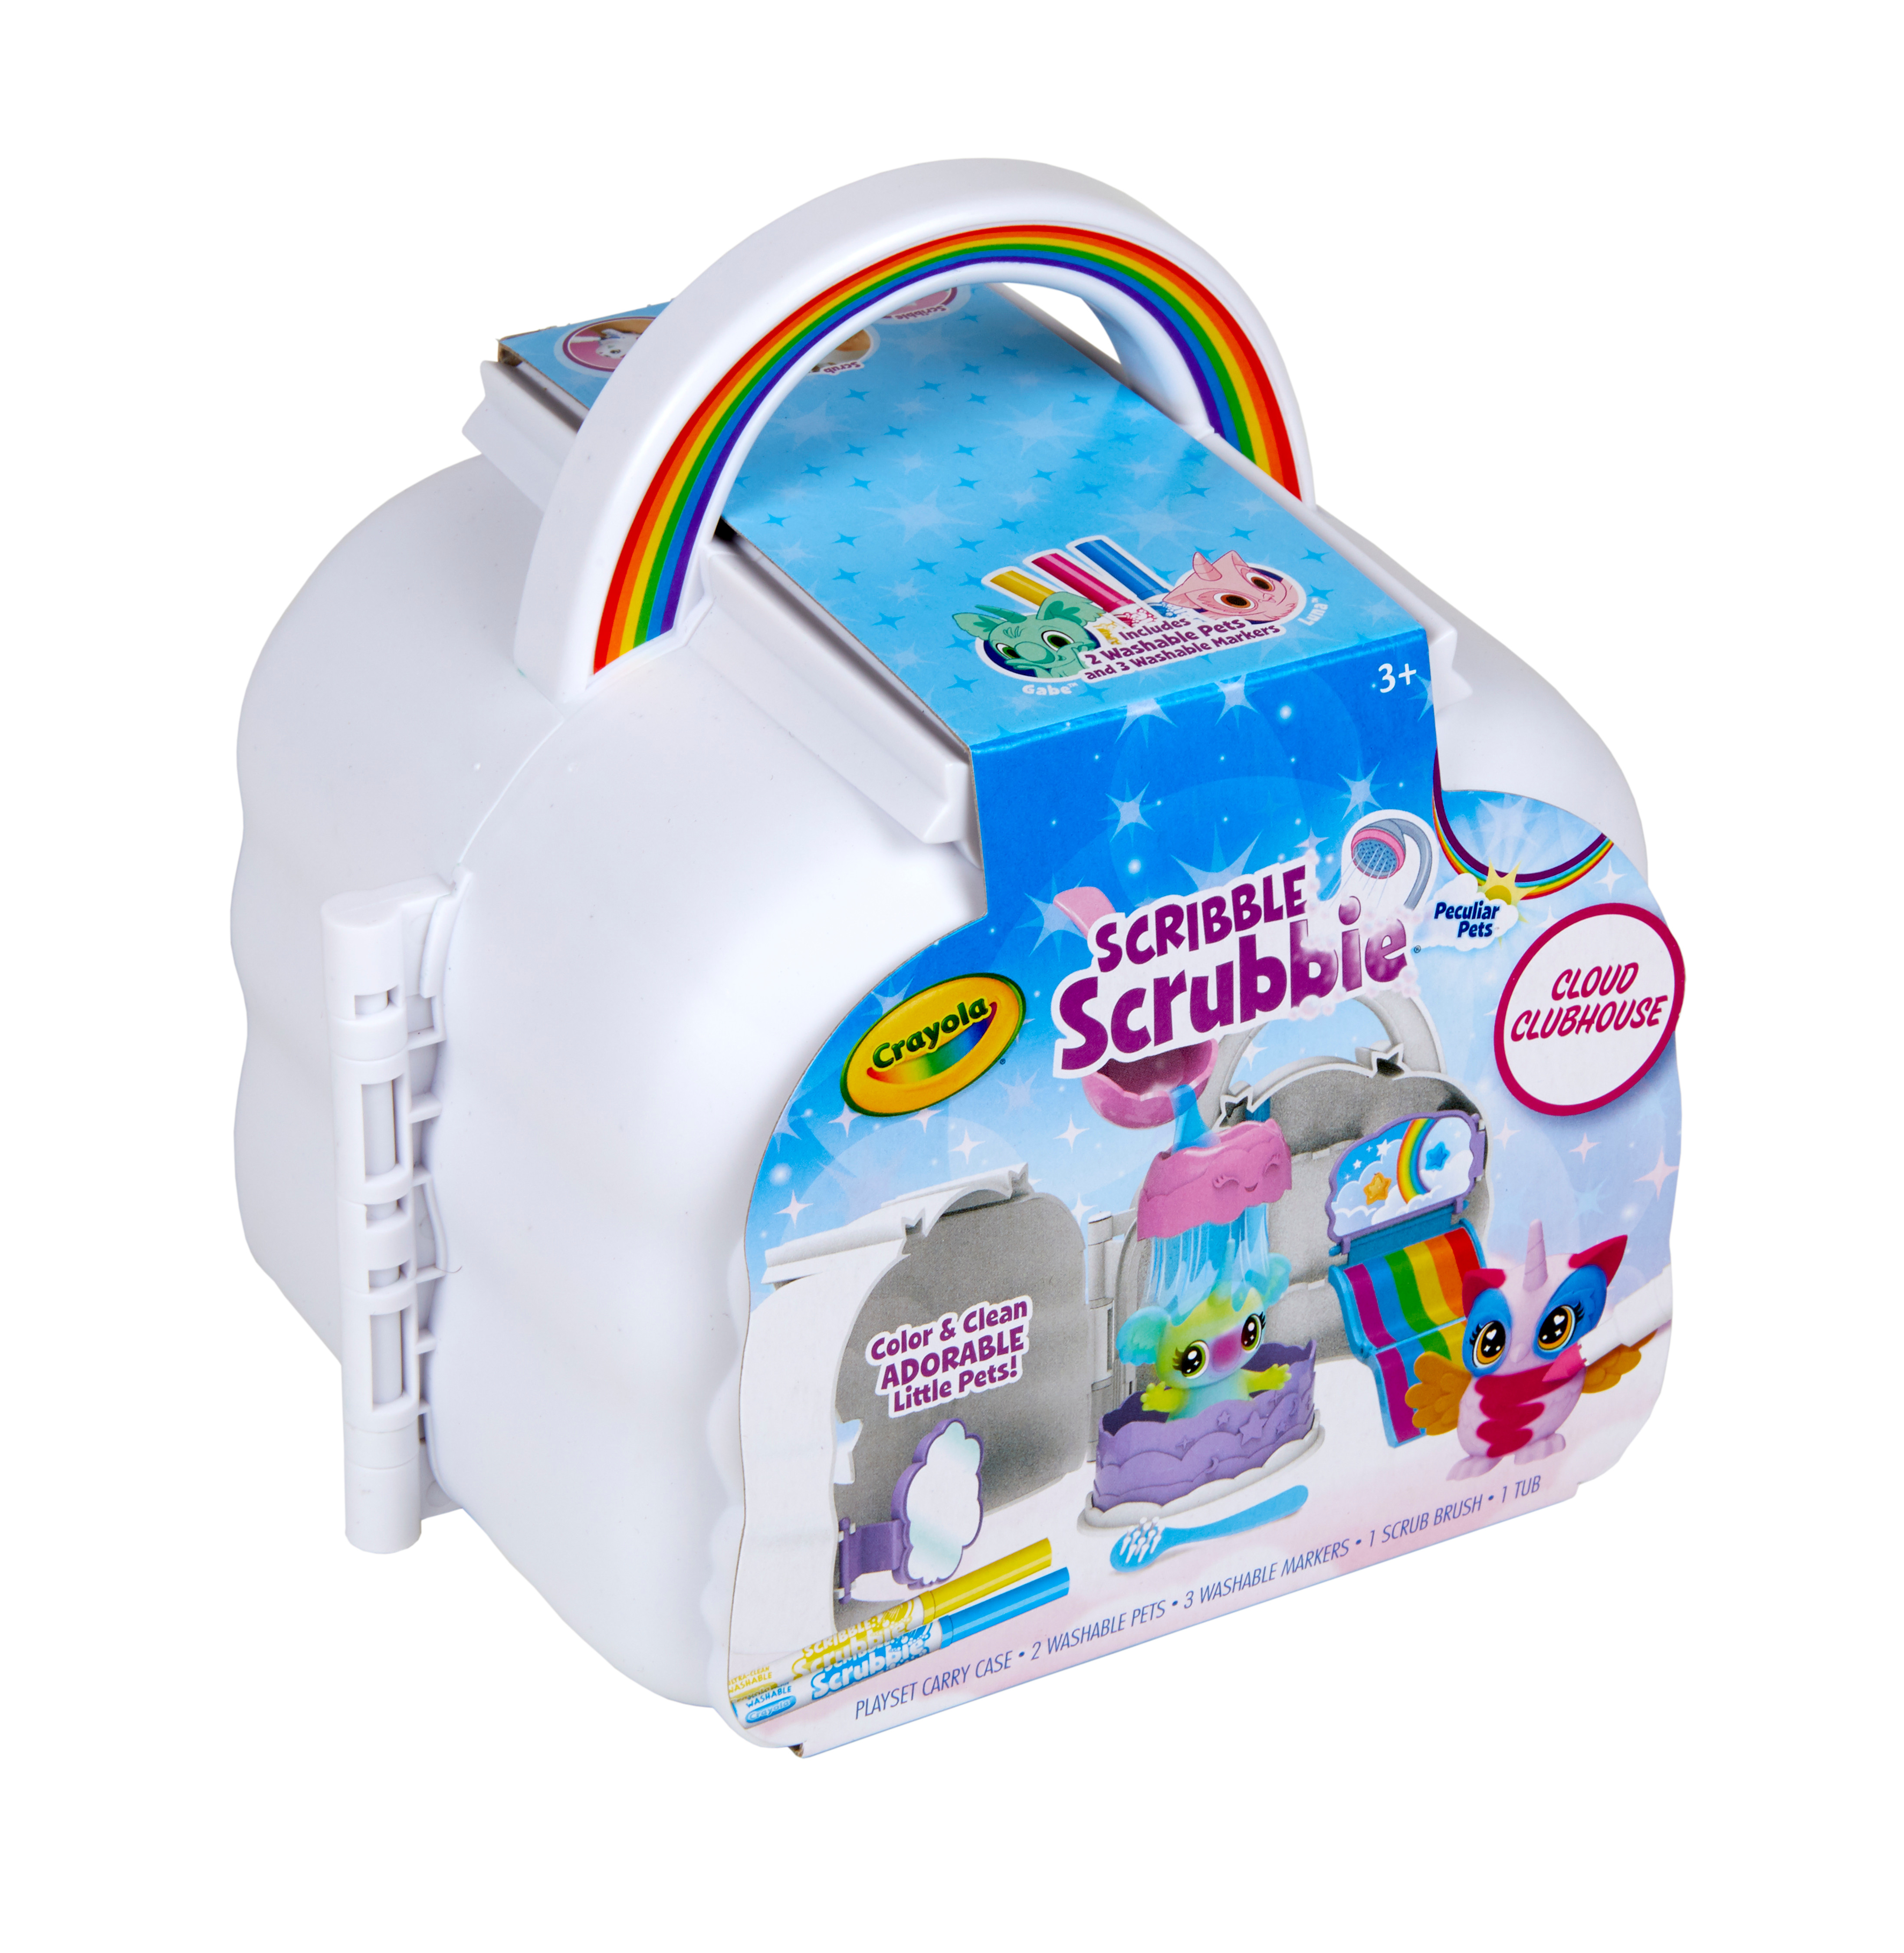 Crayola Scribble Scrubbie Cloud Clubhouse, Coloring Toys, Gifts, Beginner Unisex Child, 8 Pcs - image 5 of 10